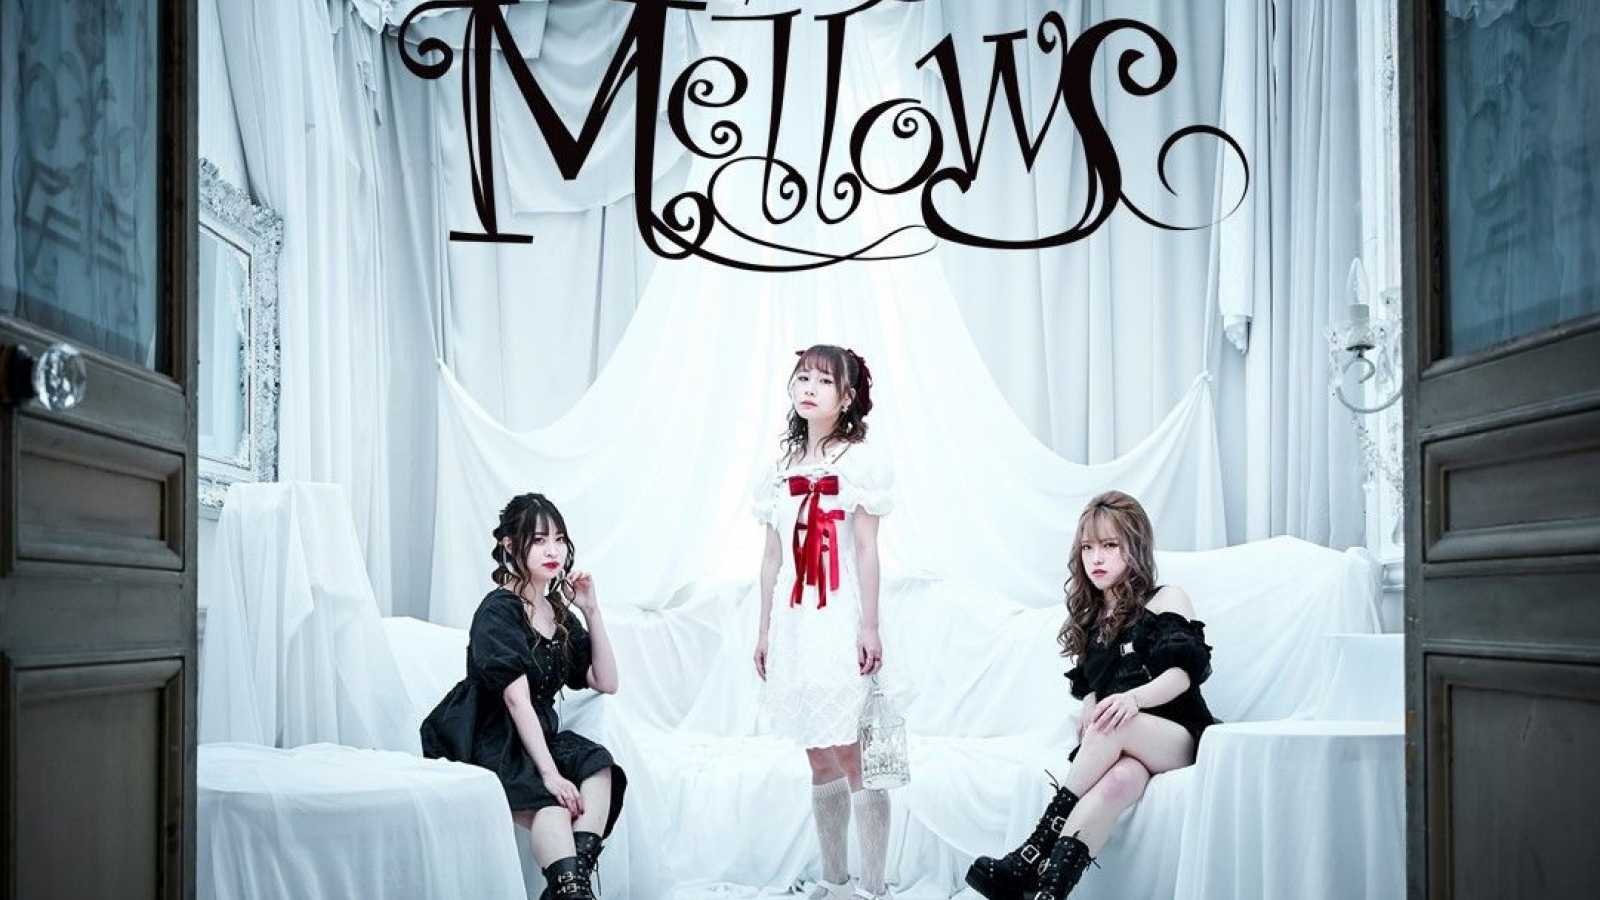 1er album pour Mellows © Mellows. MASHUP RECORDS. All rights reserved.